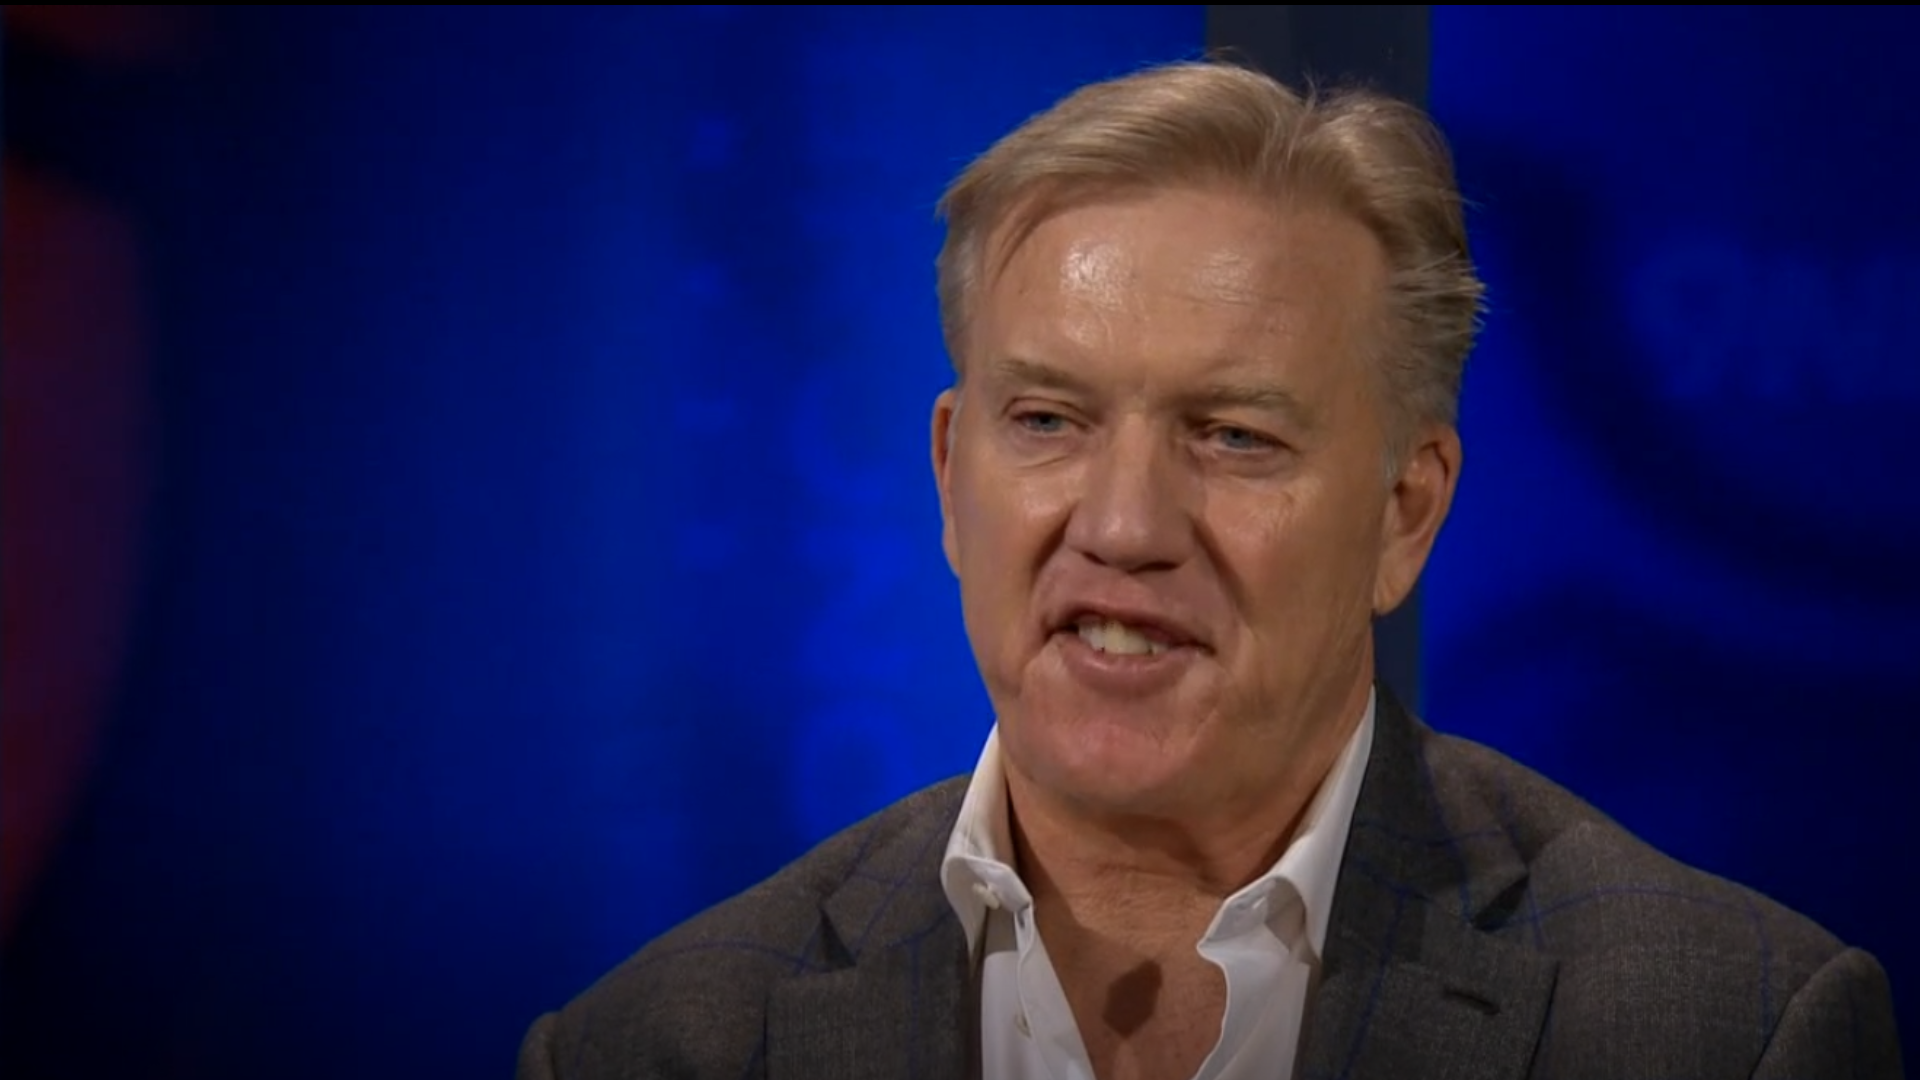 9NEWS Broncos insider Mike Klis asks Broncos GM John Elway what he thinks owner Pat Bowlen would think of the current Broncos climate.